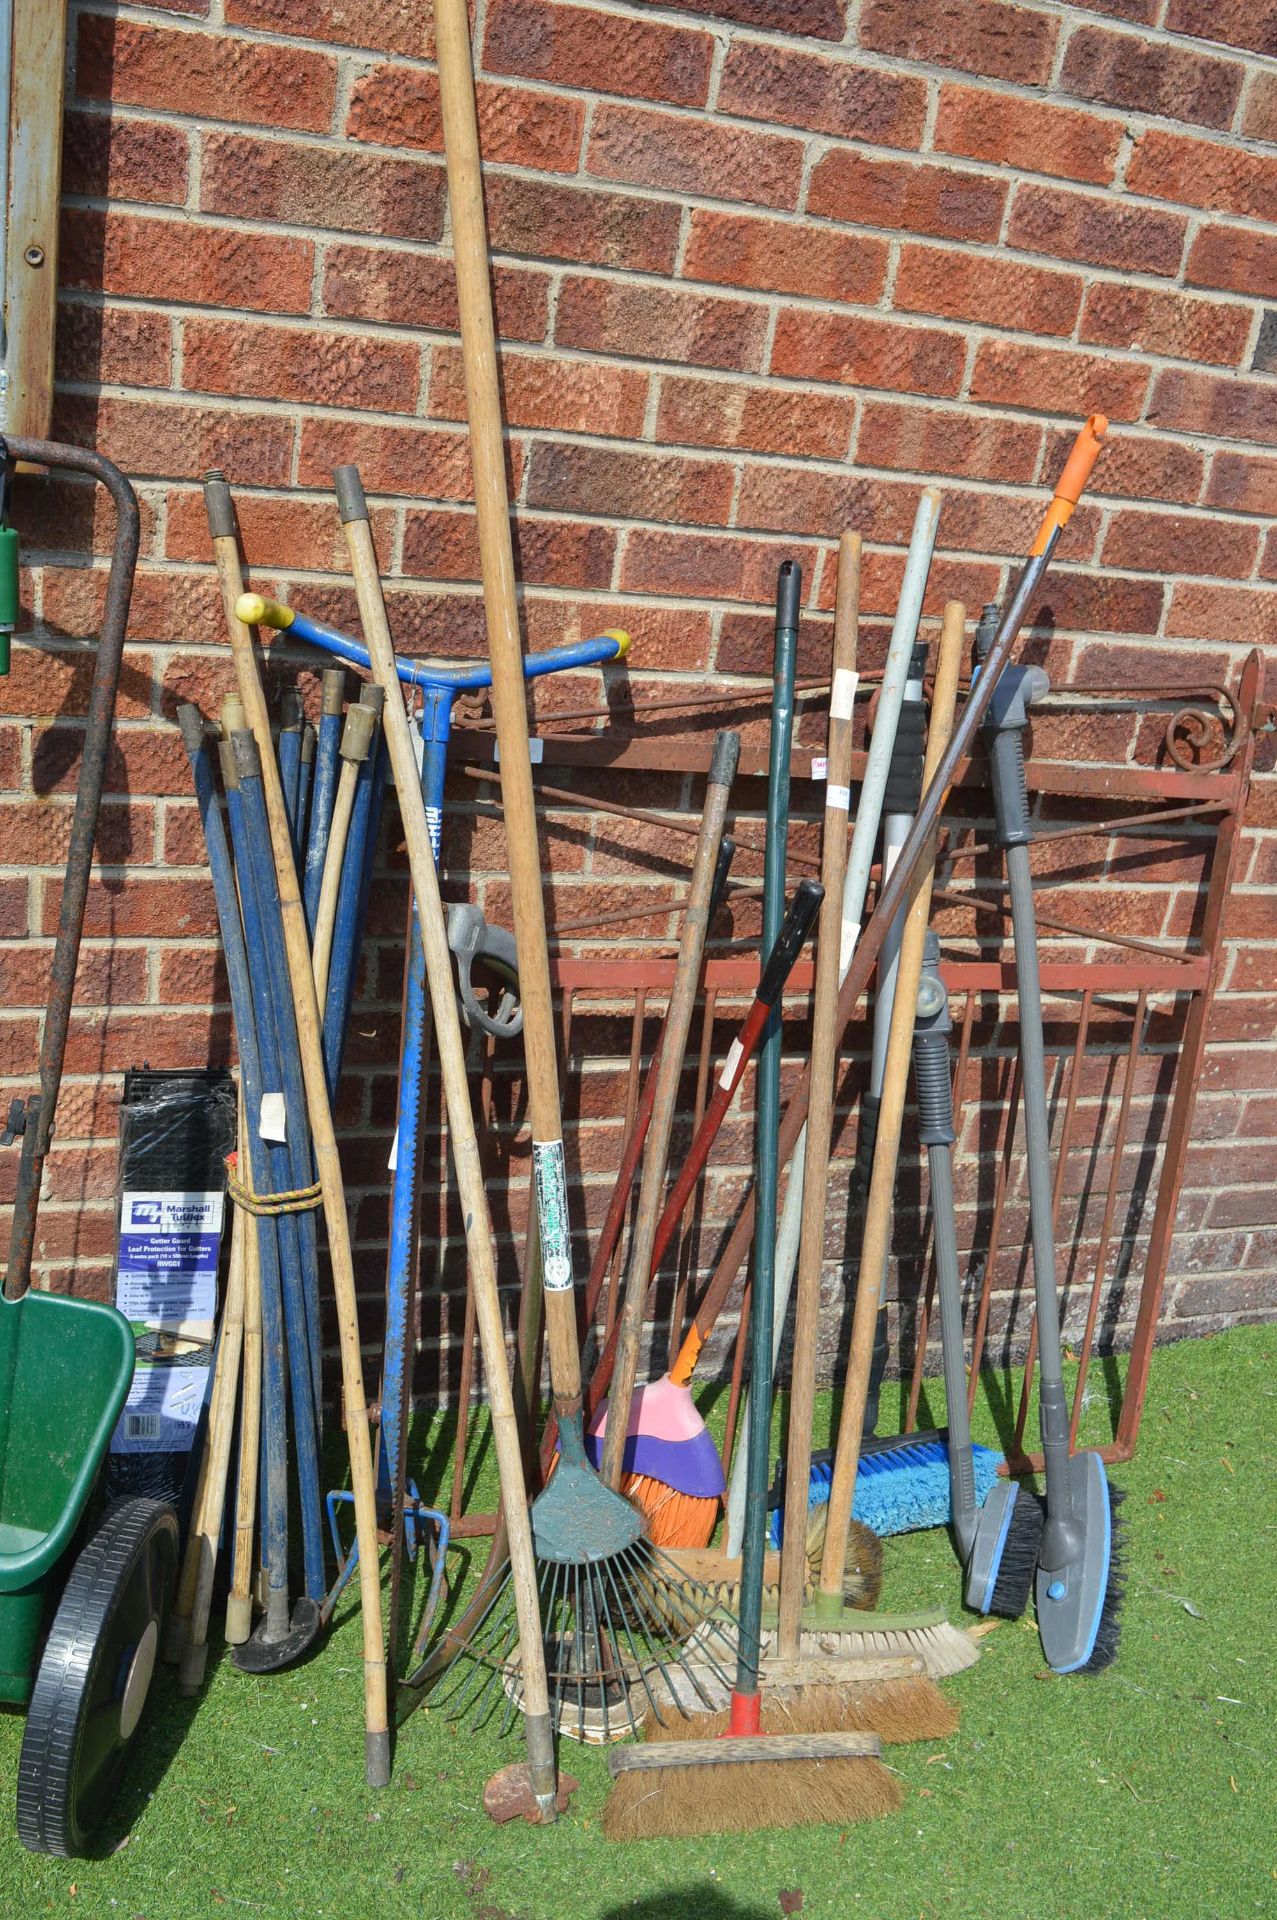 Garden Tools, Brushes, etc. (gate not included)